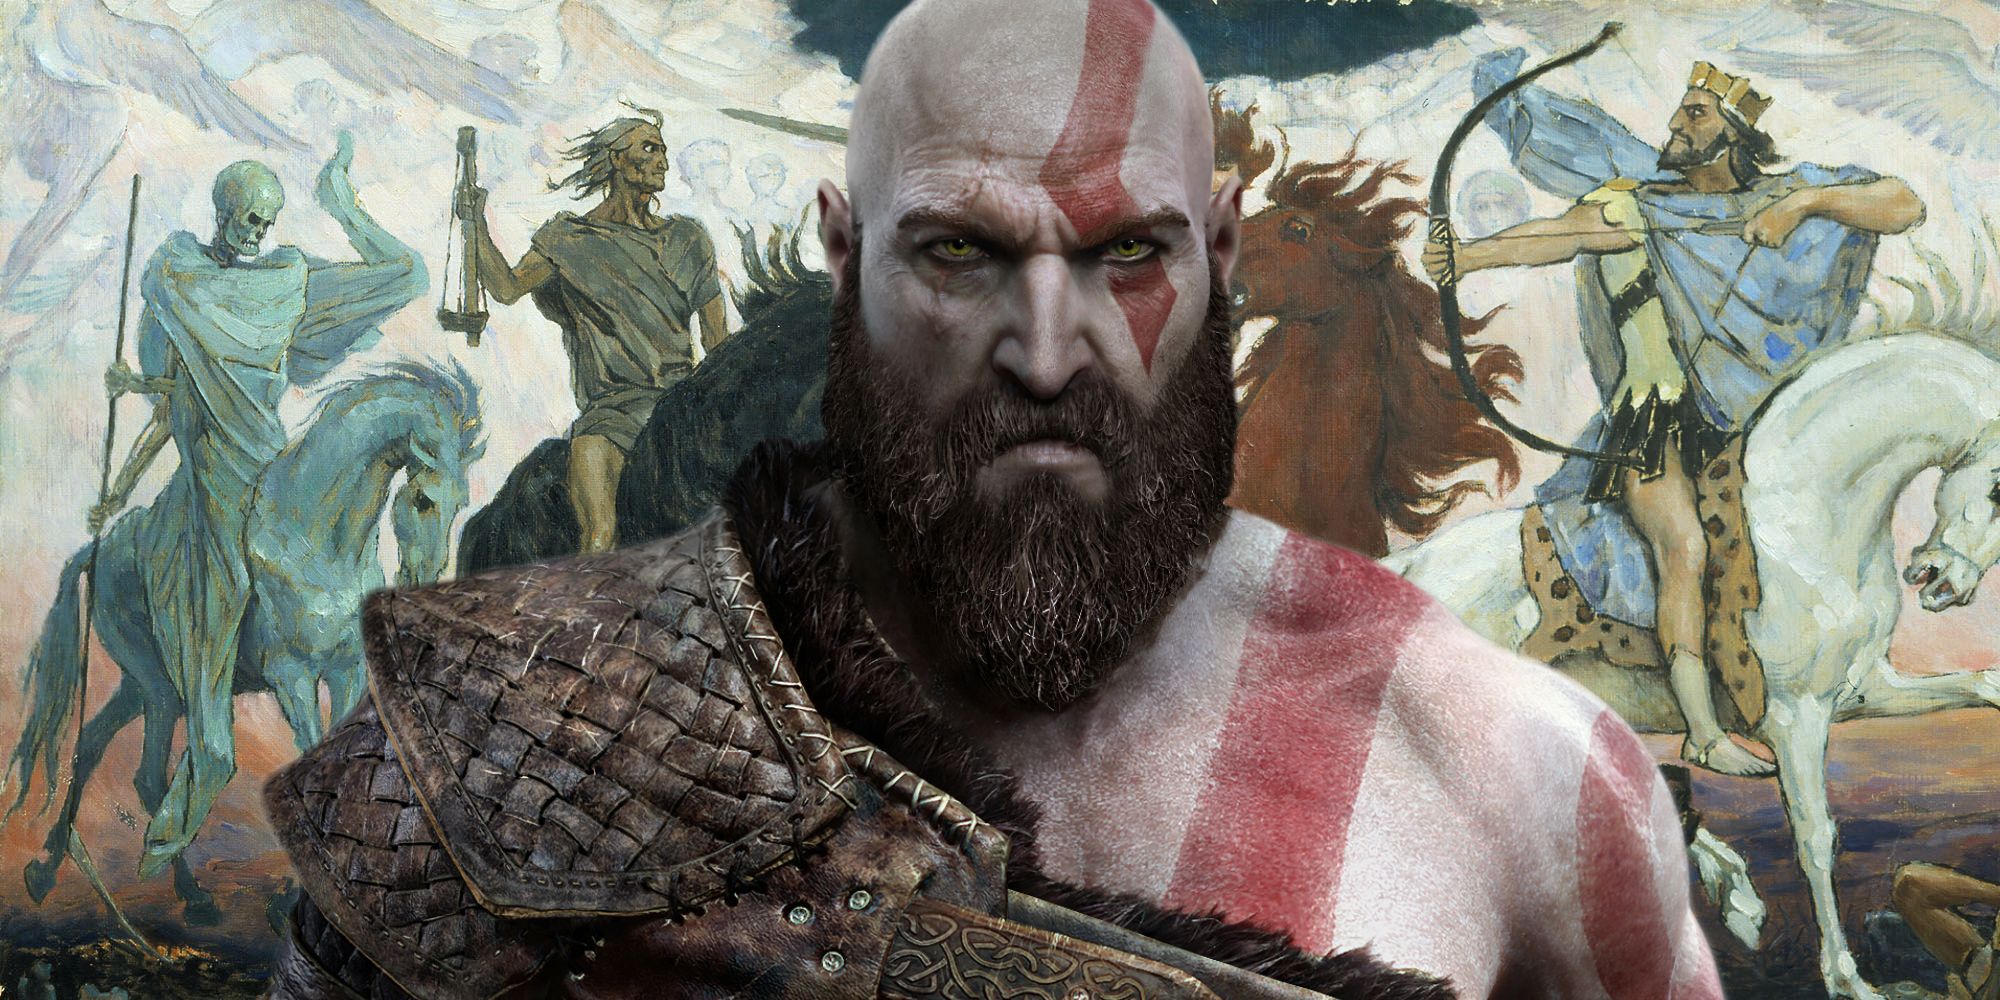 Kratos in front of the Four Horsemen of the Apocalypse